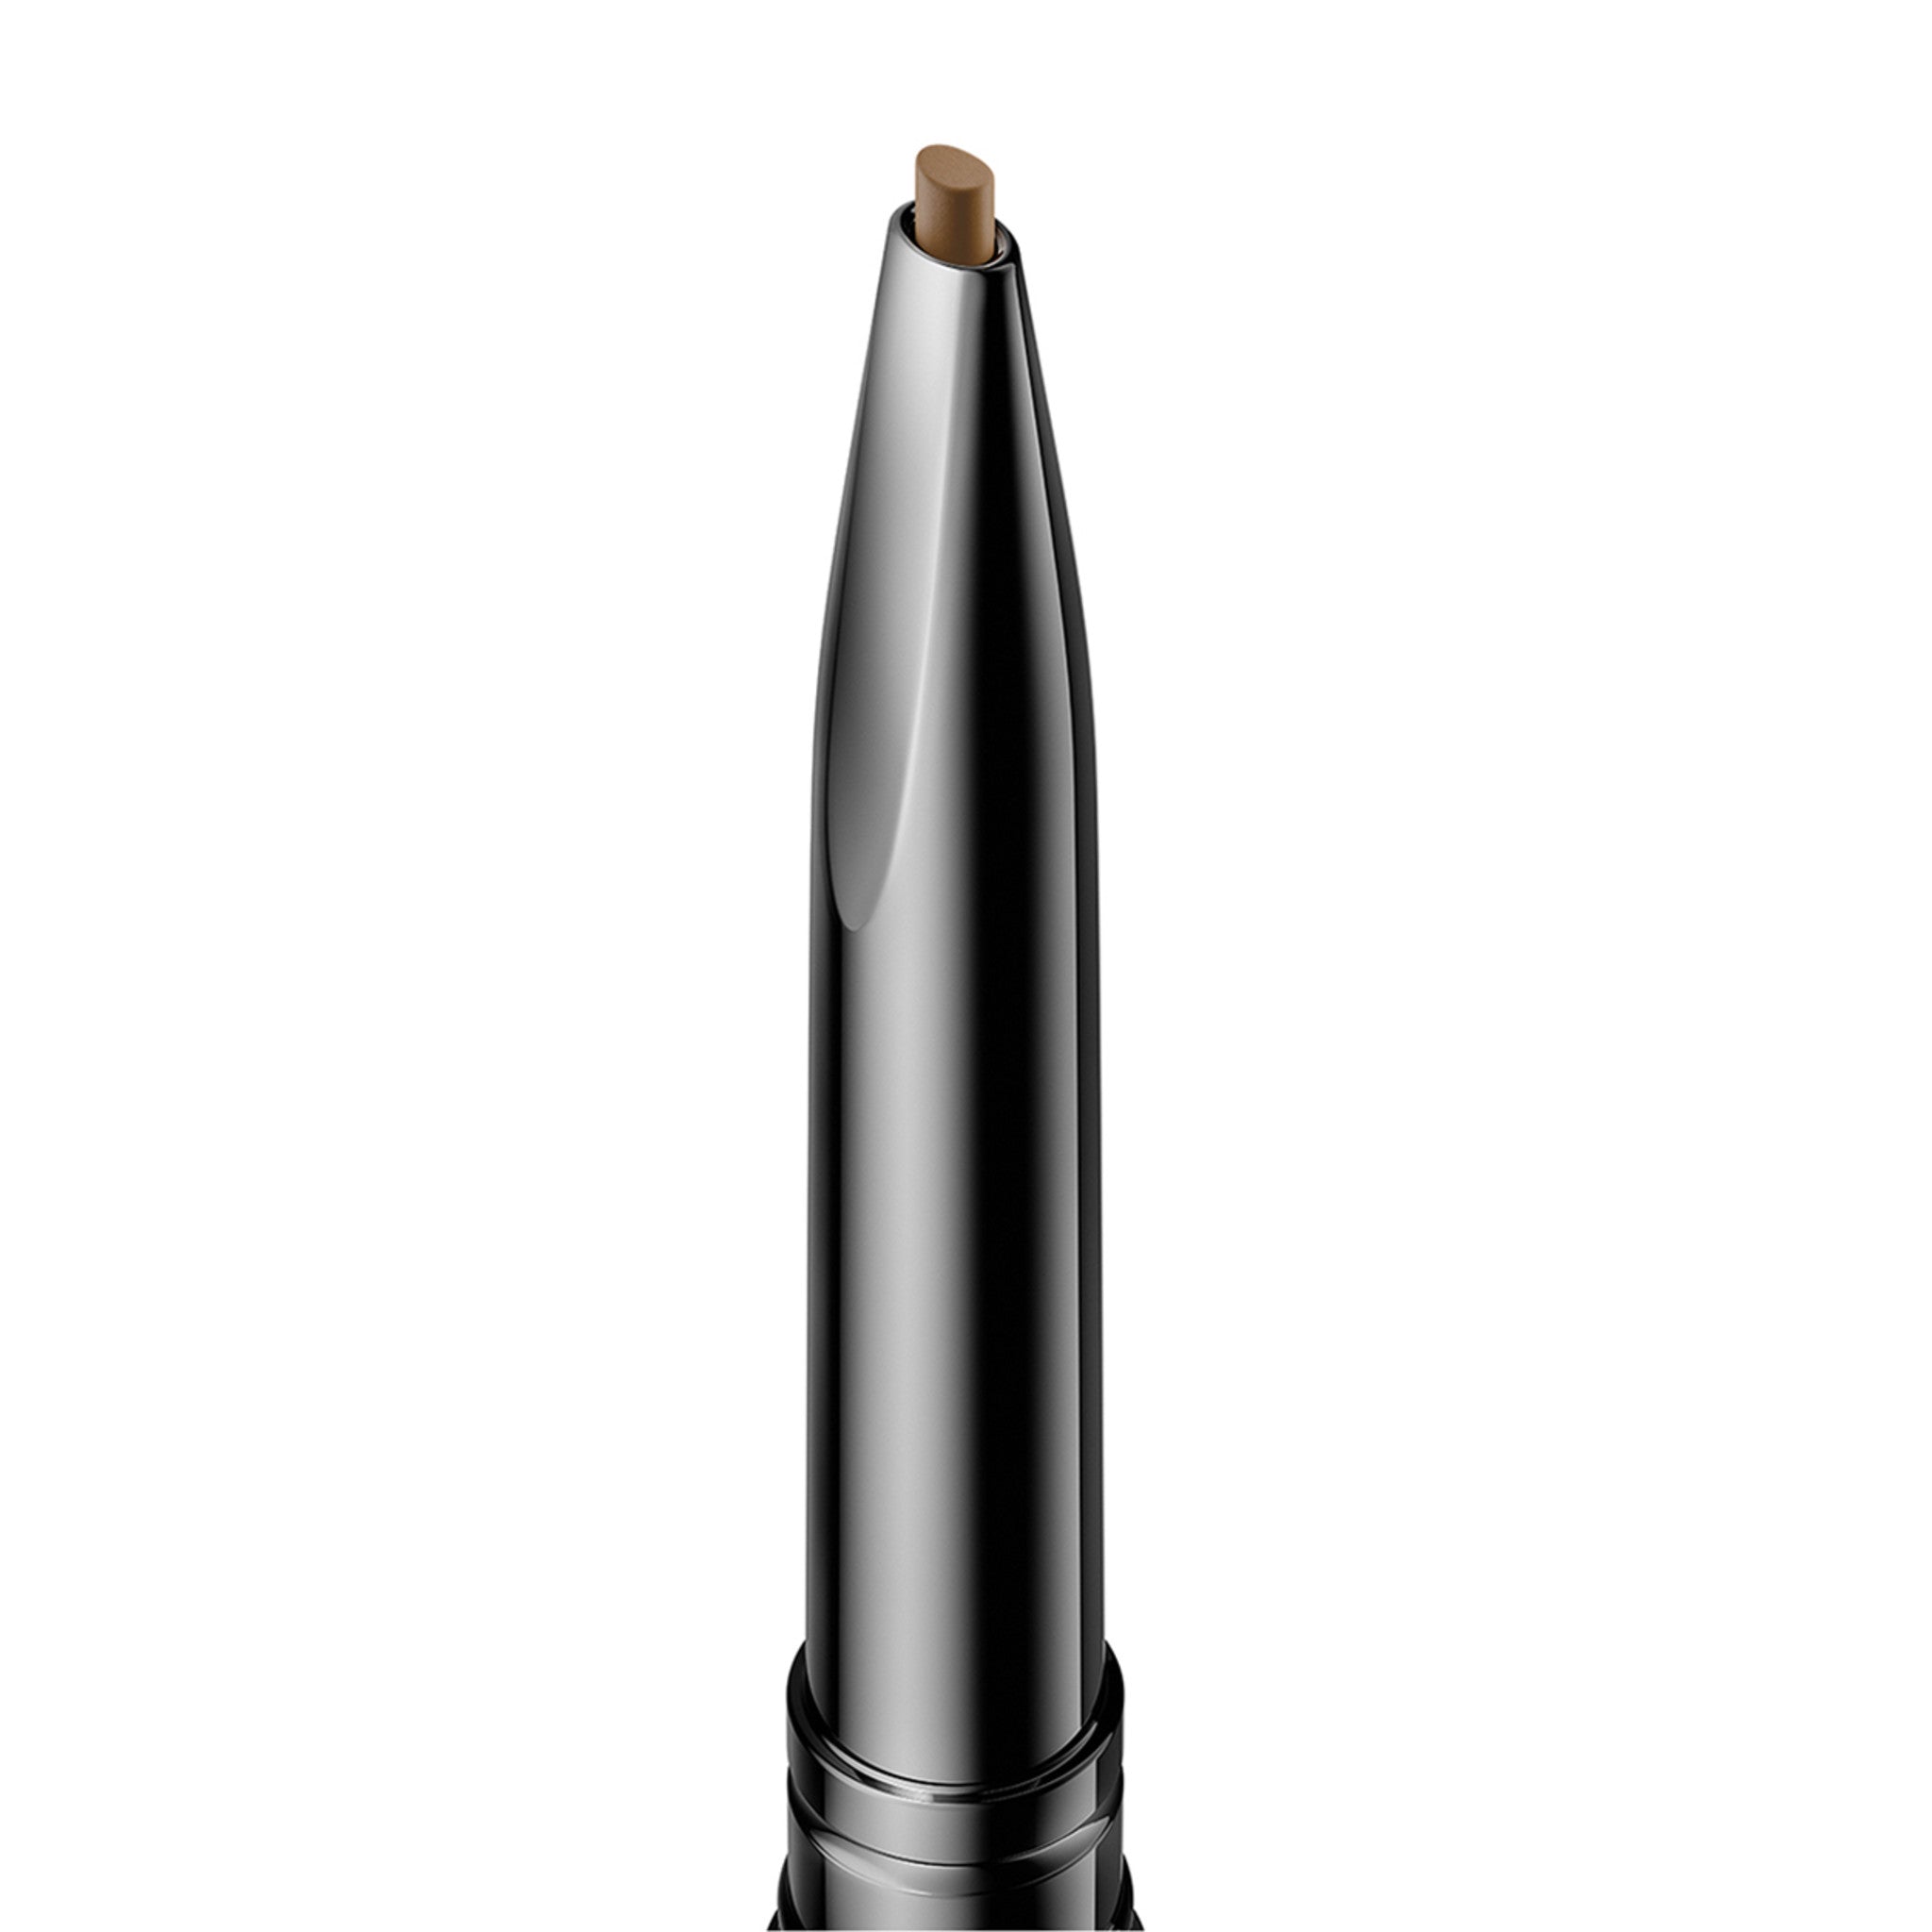 Hourglass Arch Brow Micro Sculpting Pencil Color/Shade variant: Platinum Blonde main image.